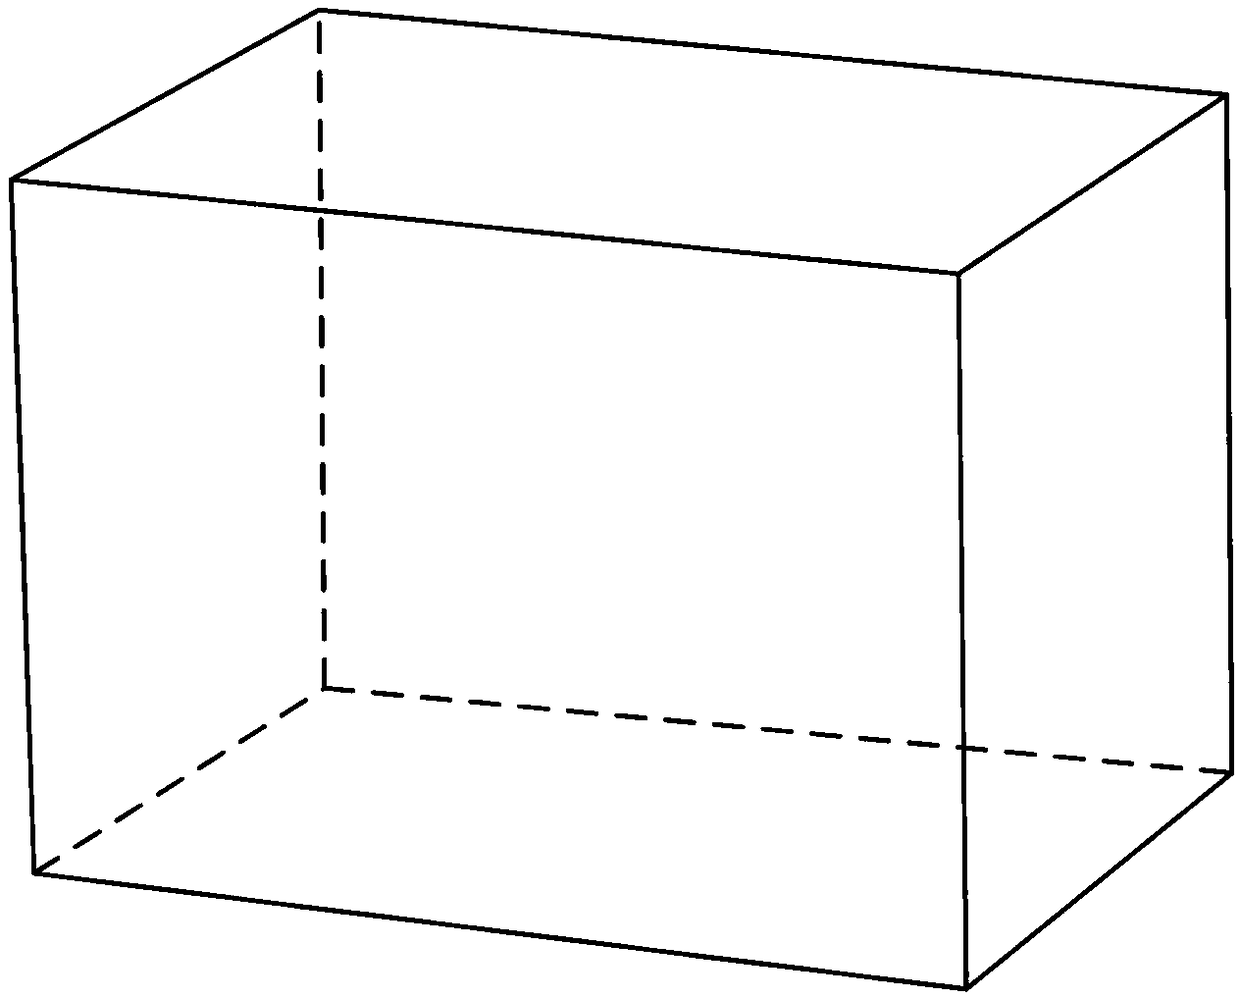 A stumpage height extraction method under a plane constraint